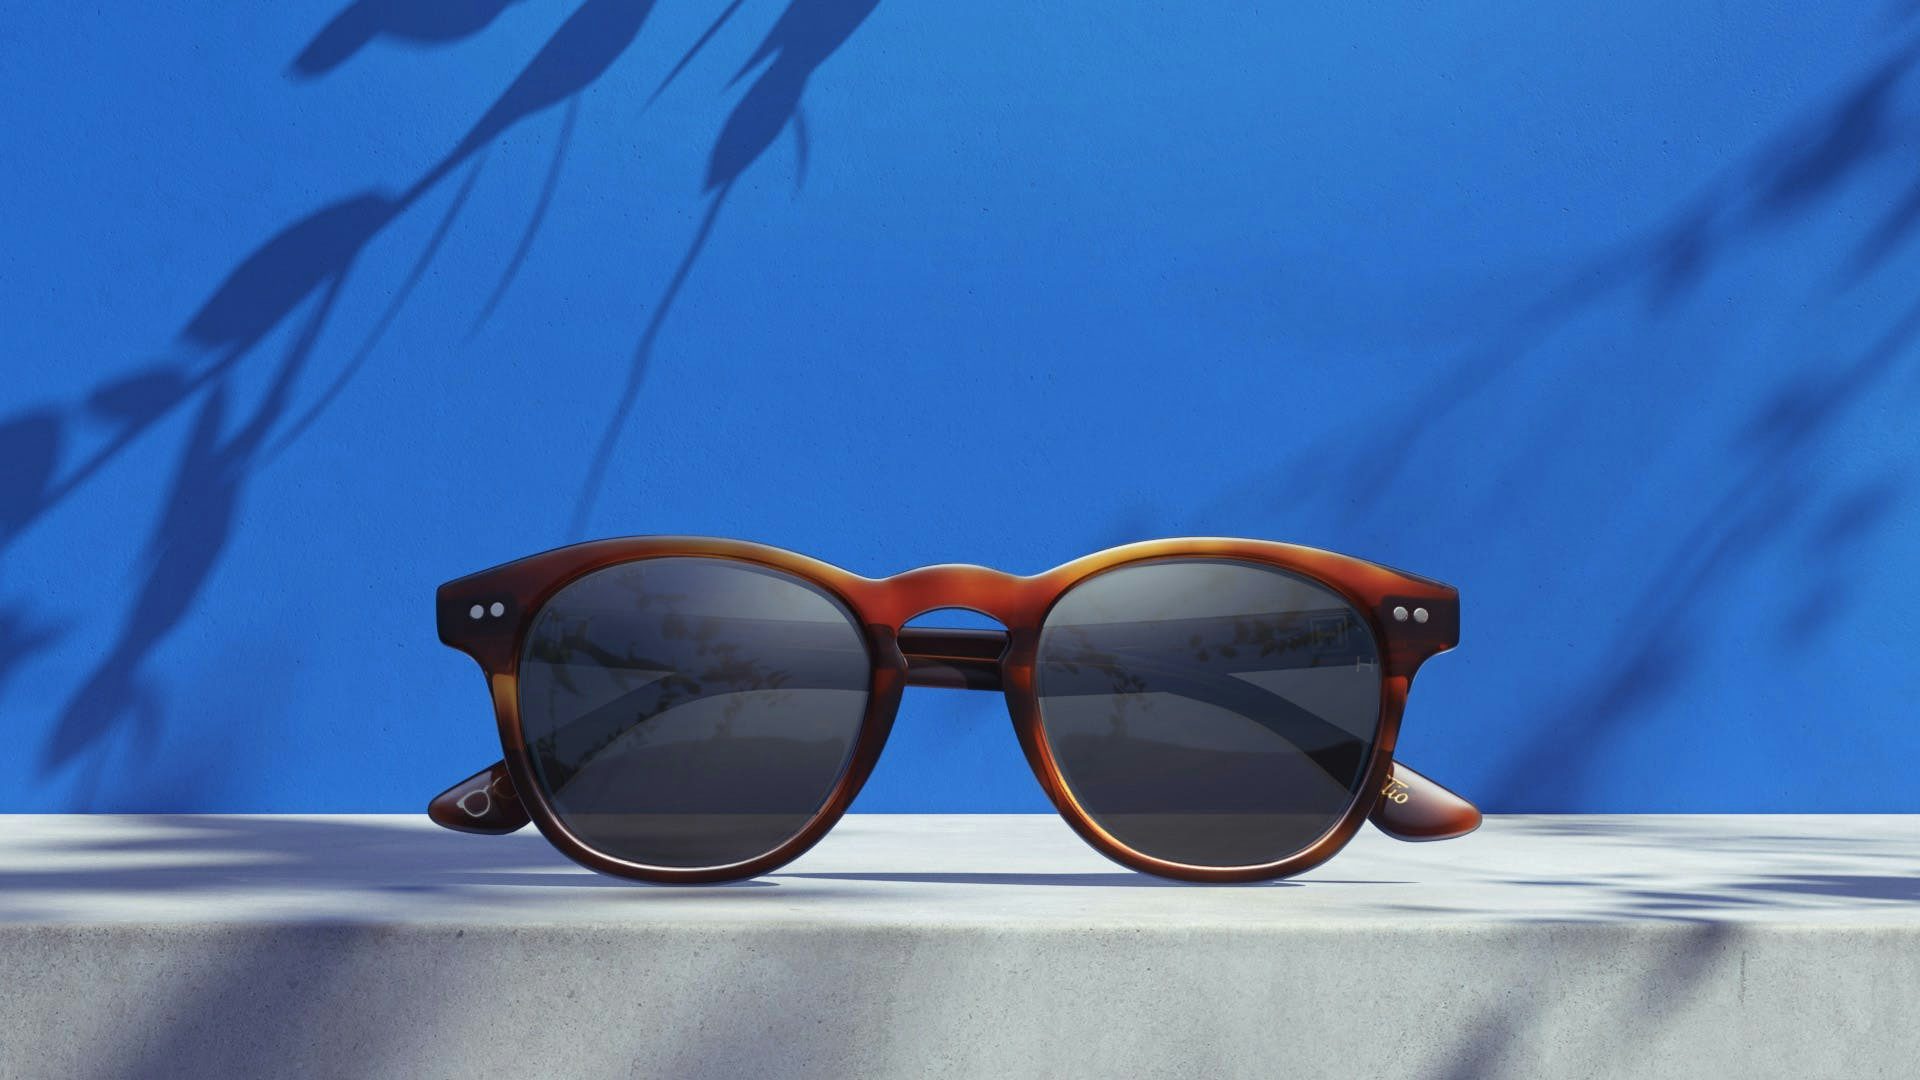 A pair of sunglasses on top of a stone surface with a blue background. Shadows from branches all over.